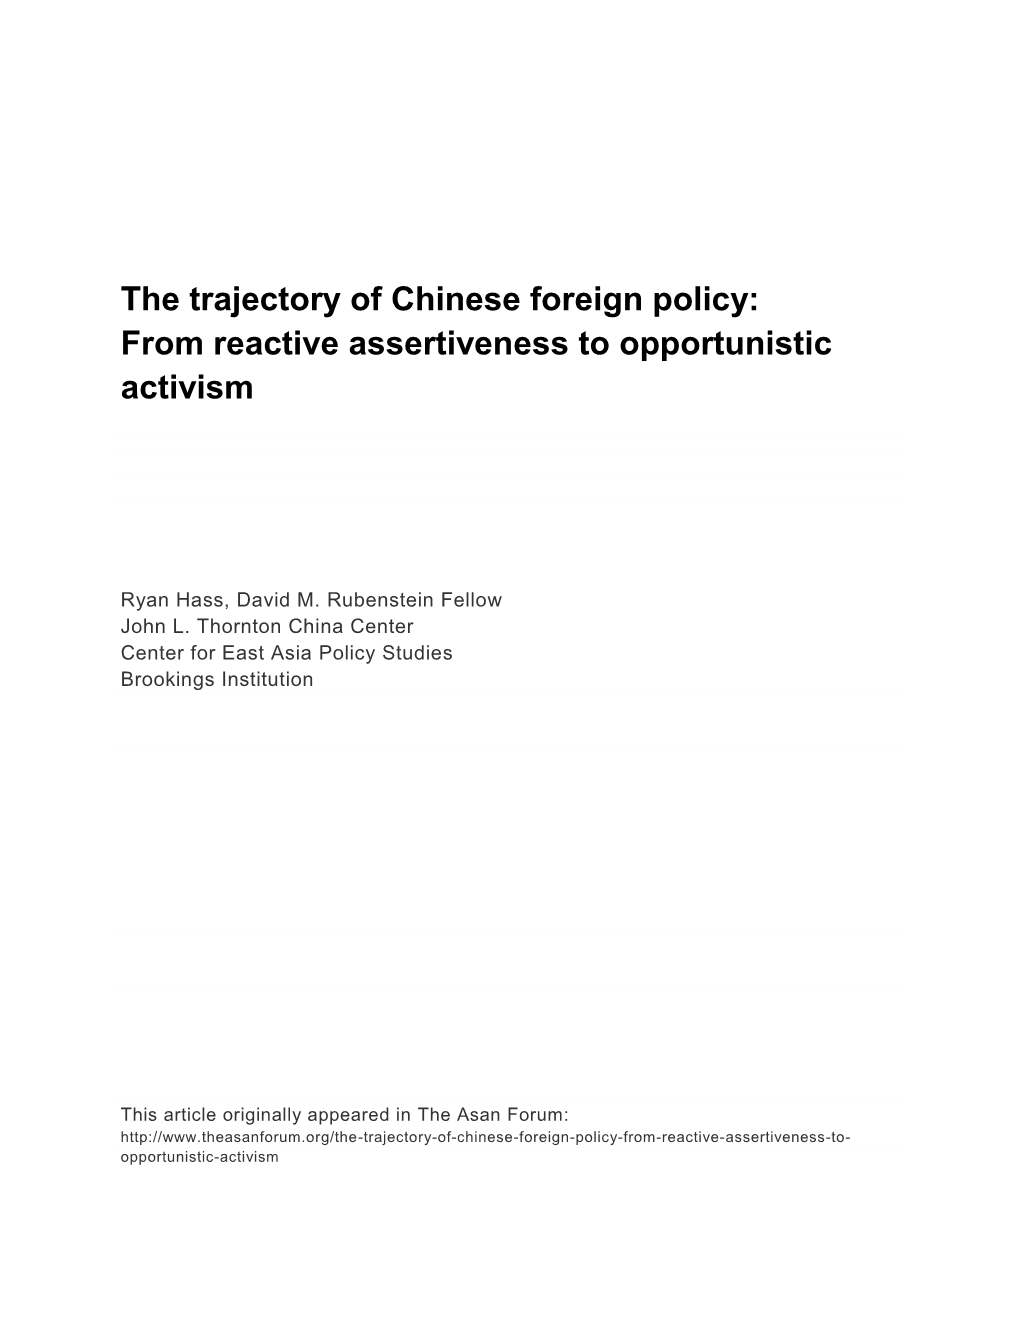 The Trajectory of Chinese Foreign Policy: from Reactive Assertiveness to Opportunistic Activism